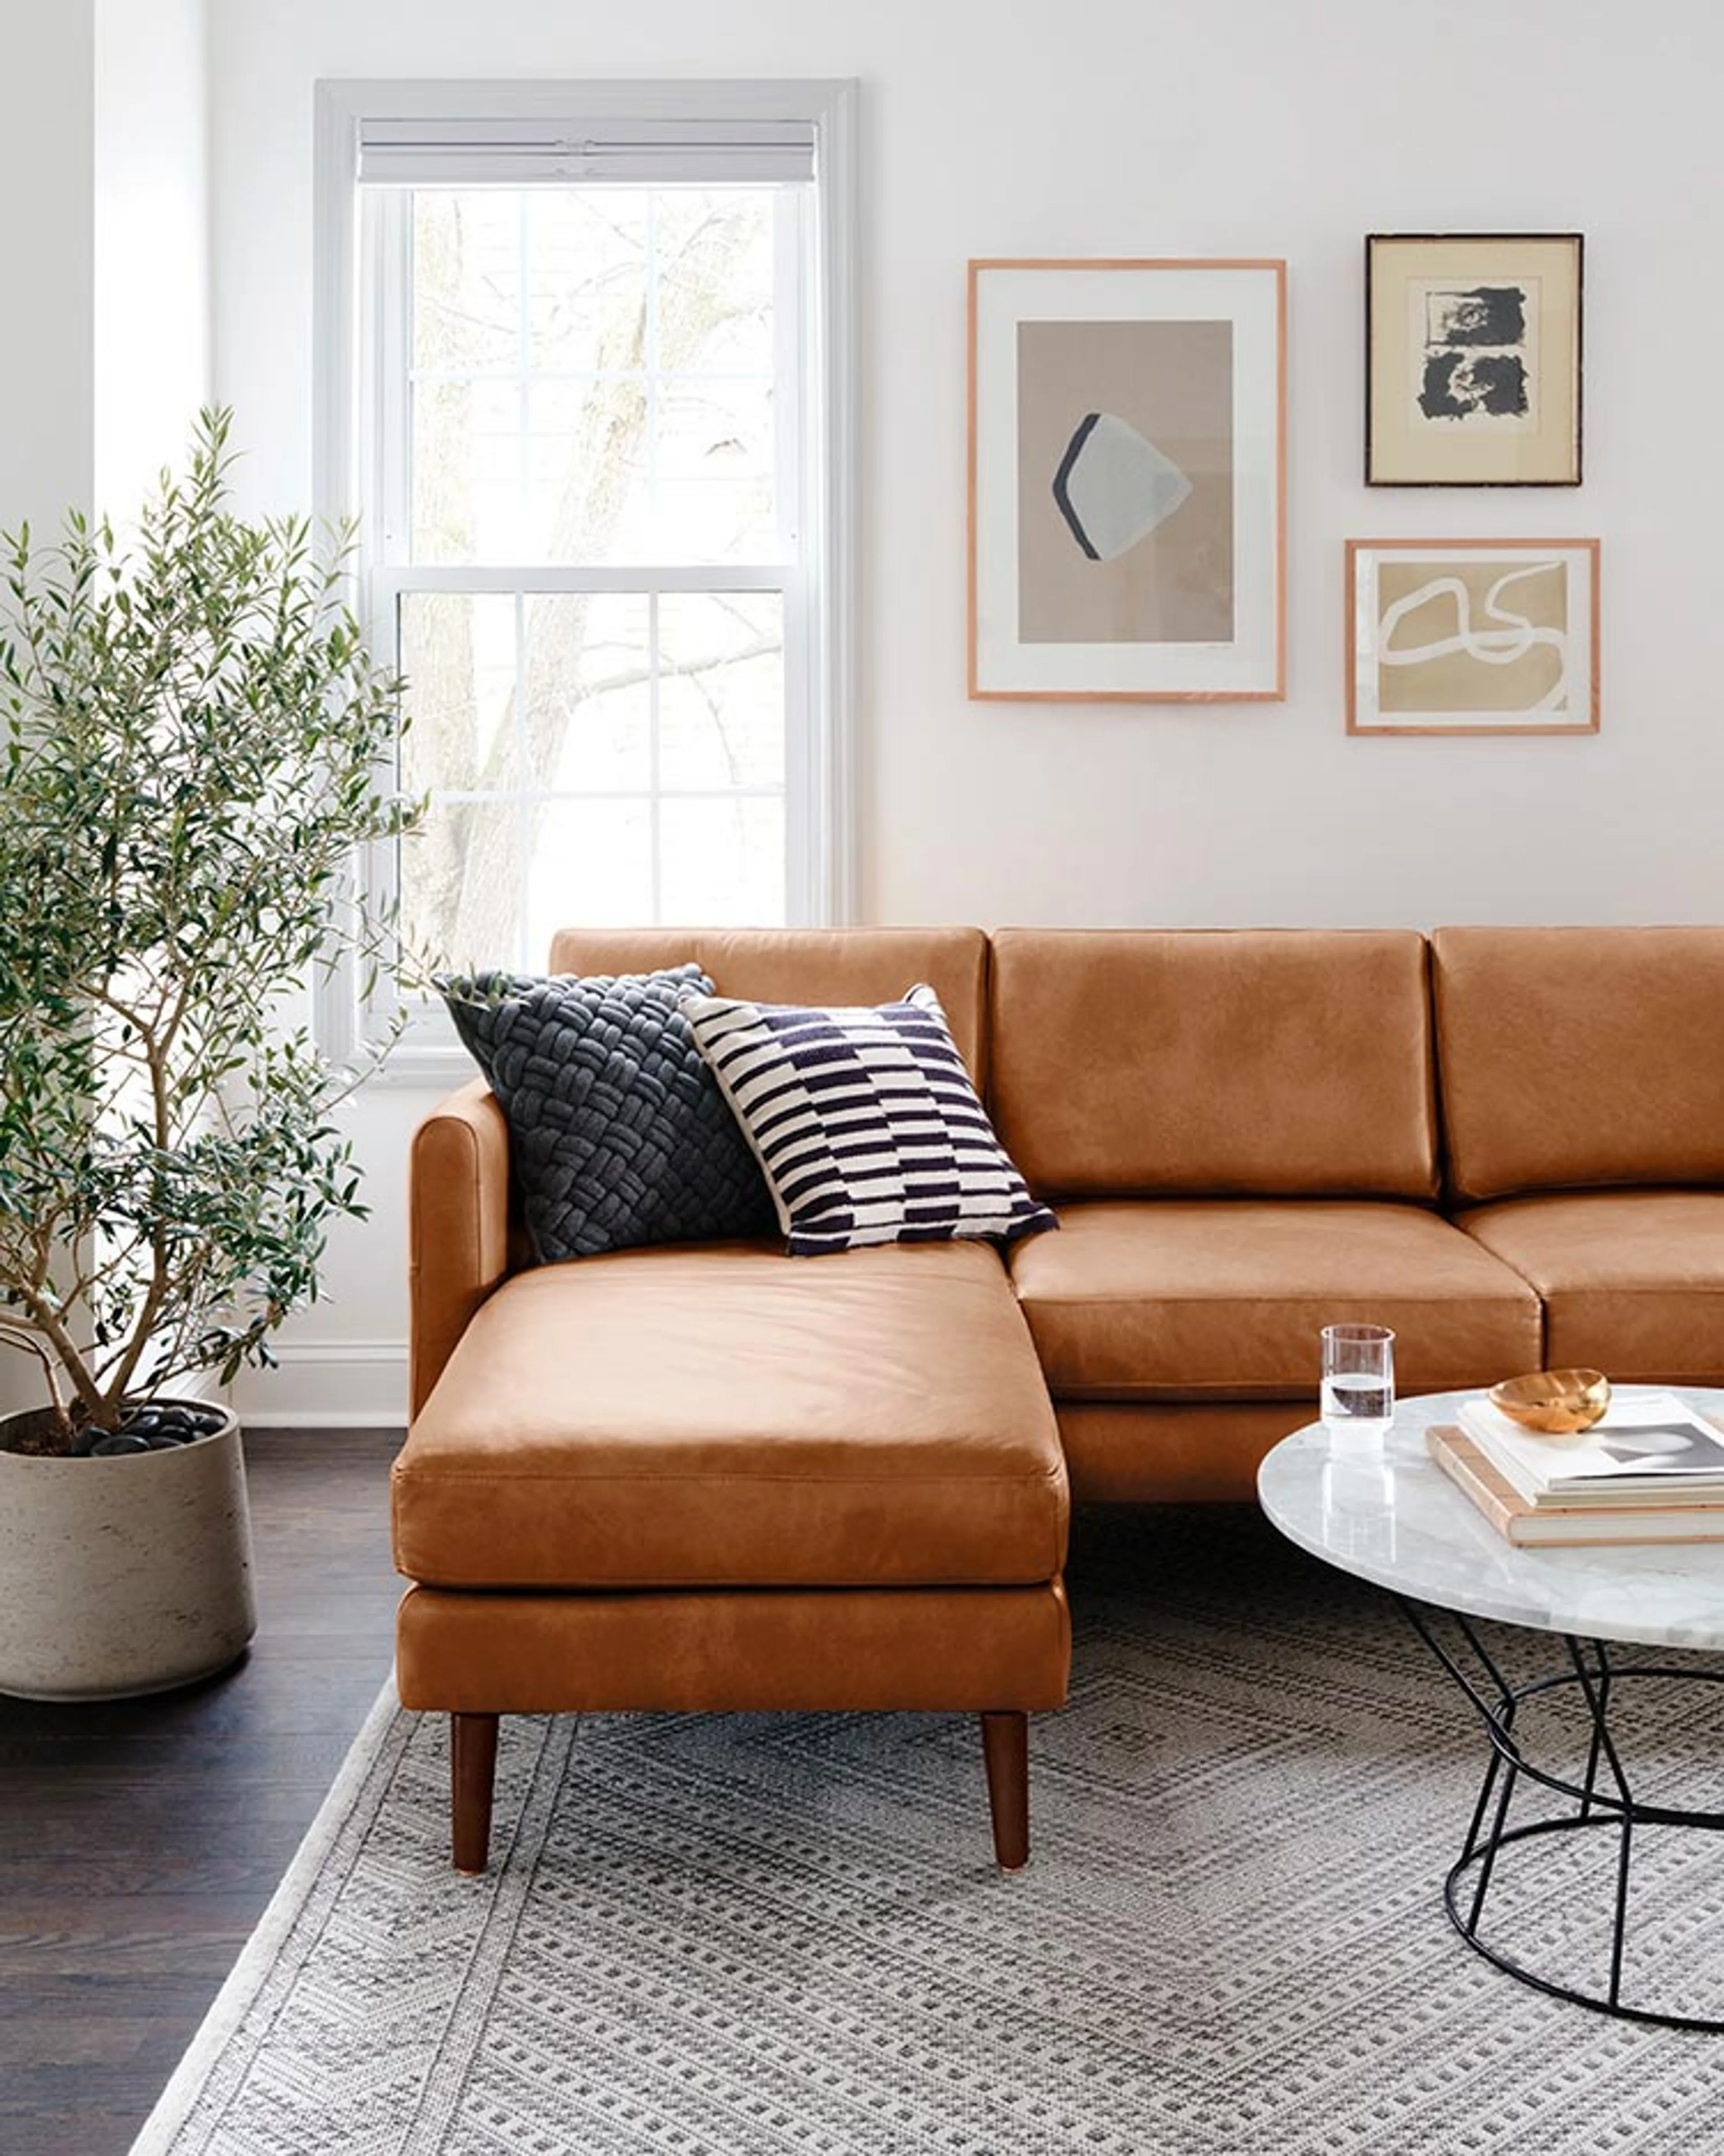 Suburban home living room with Nomad leather double chaise sofa